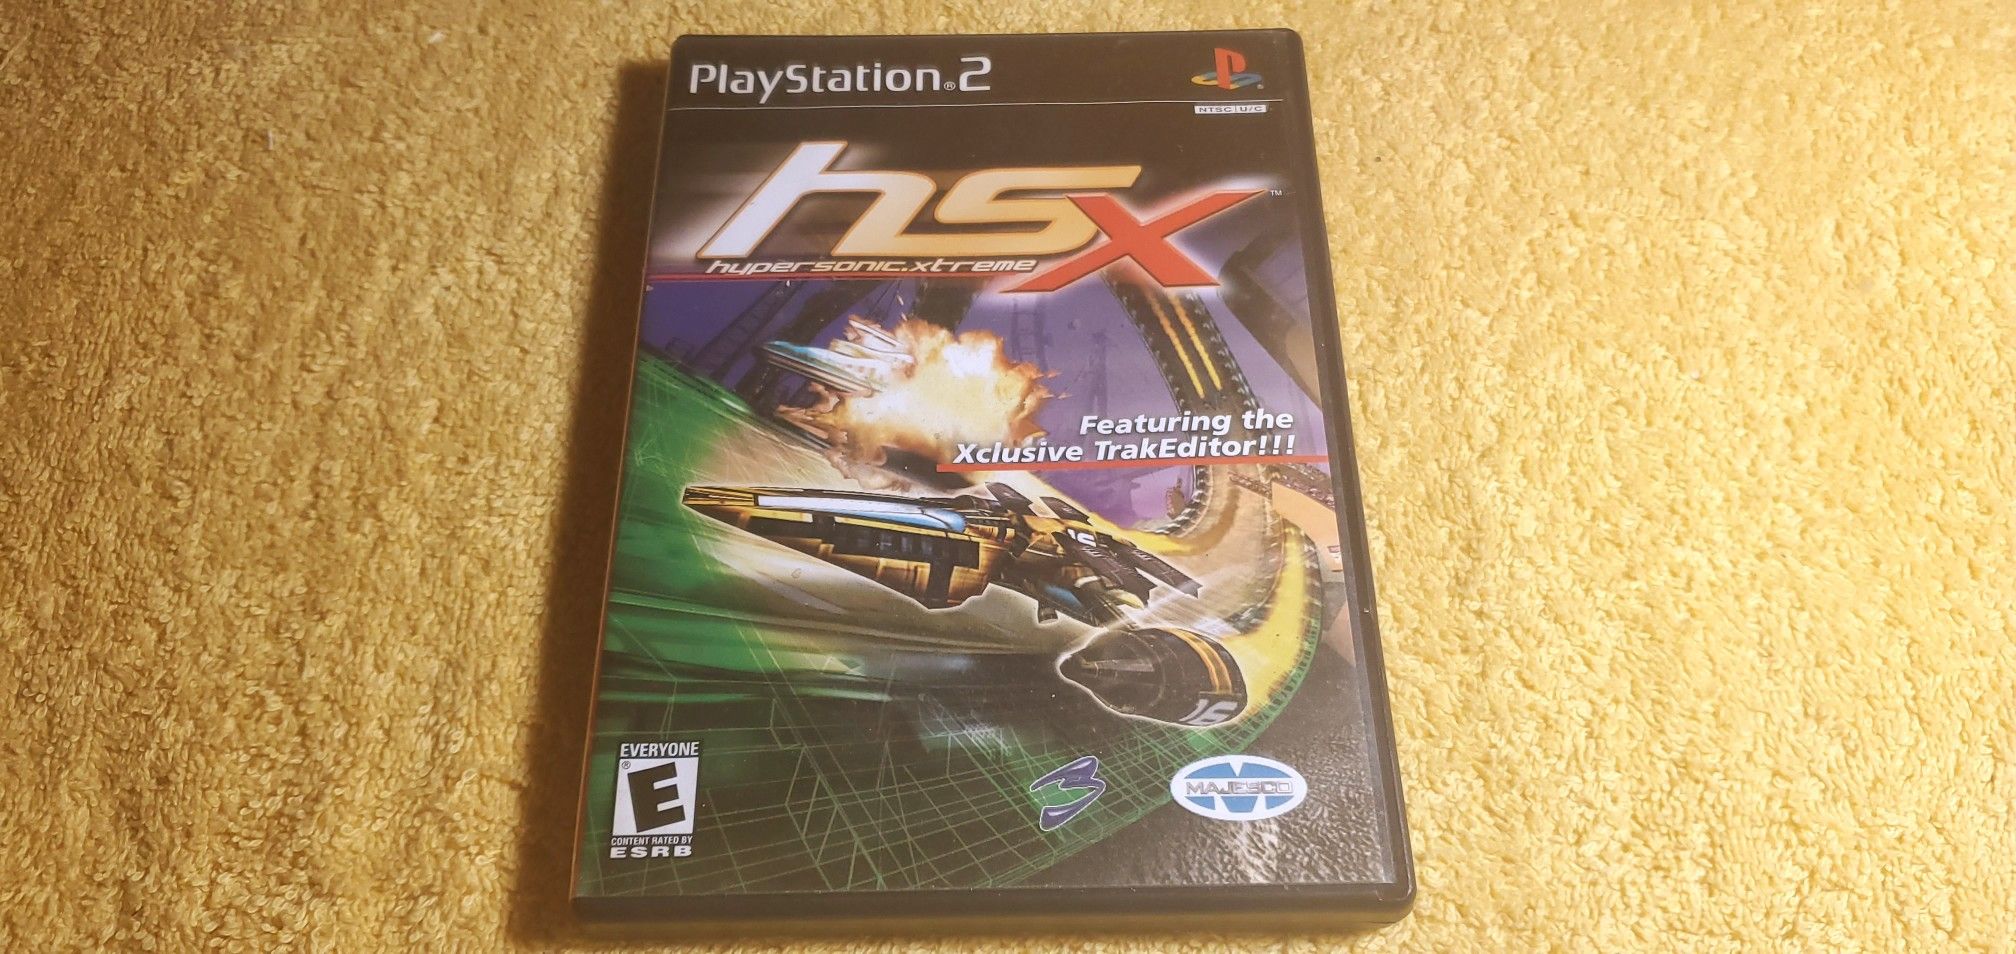 HYPER SONIC EXTREME PS2 GAME COMPLETE